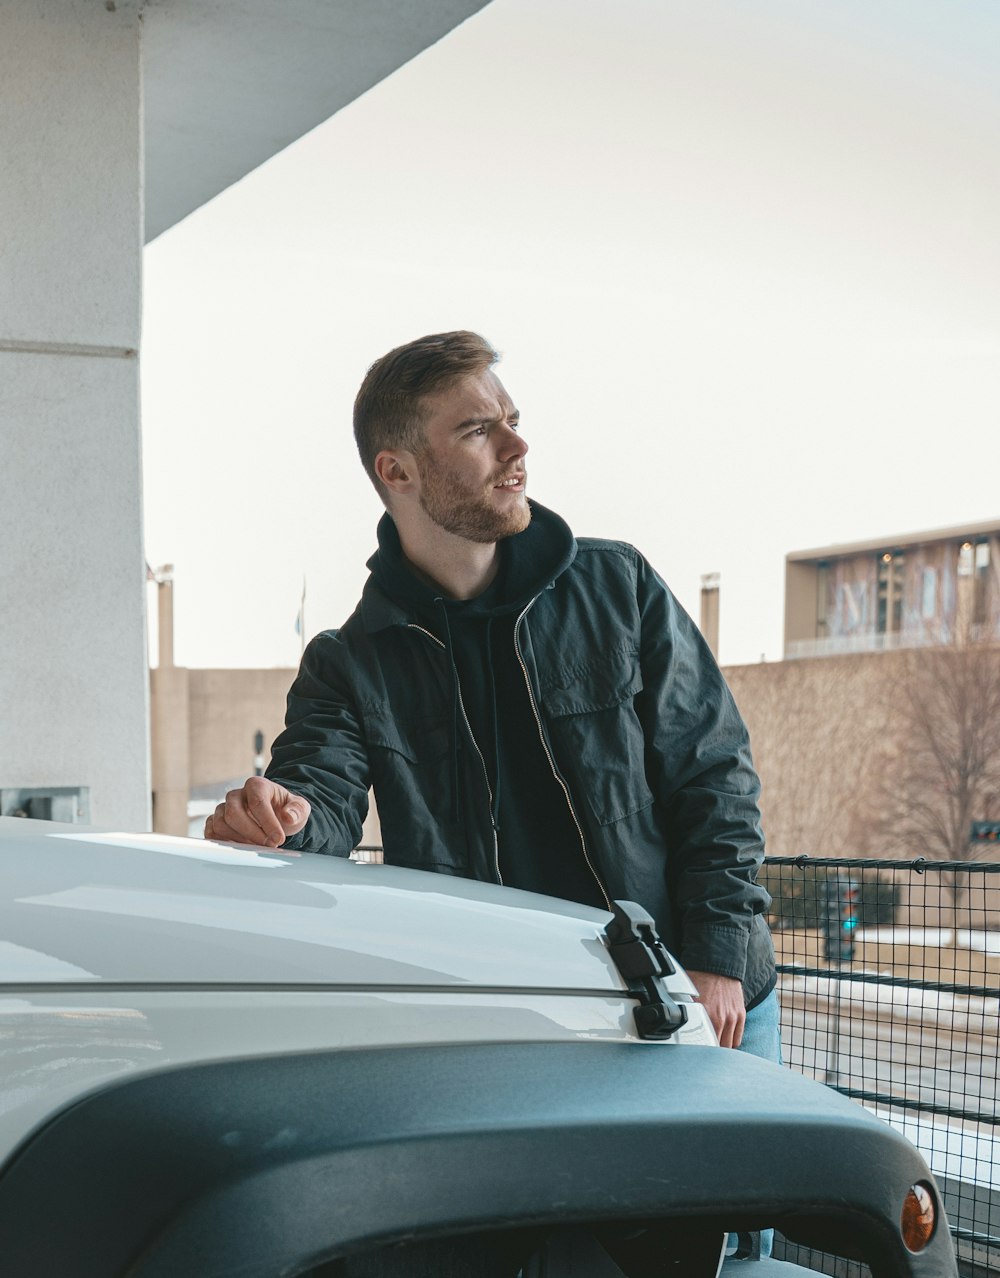 a man standing next to a car with headphones on